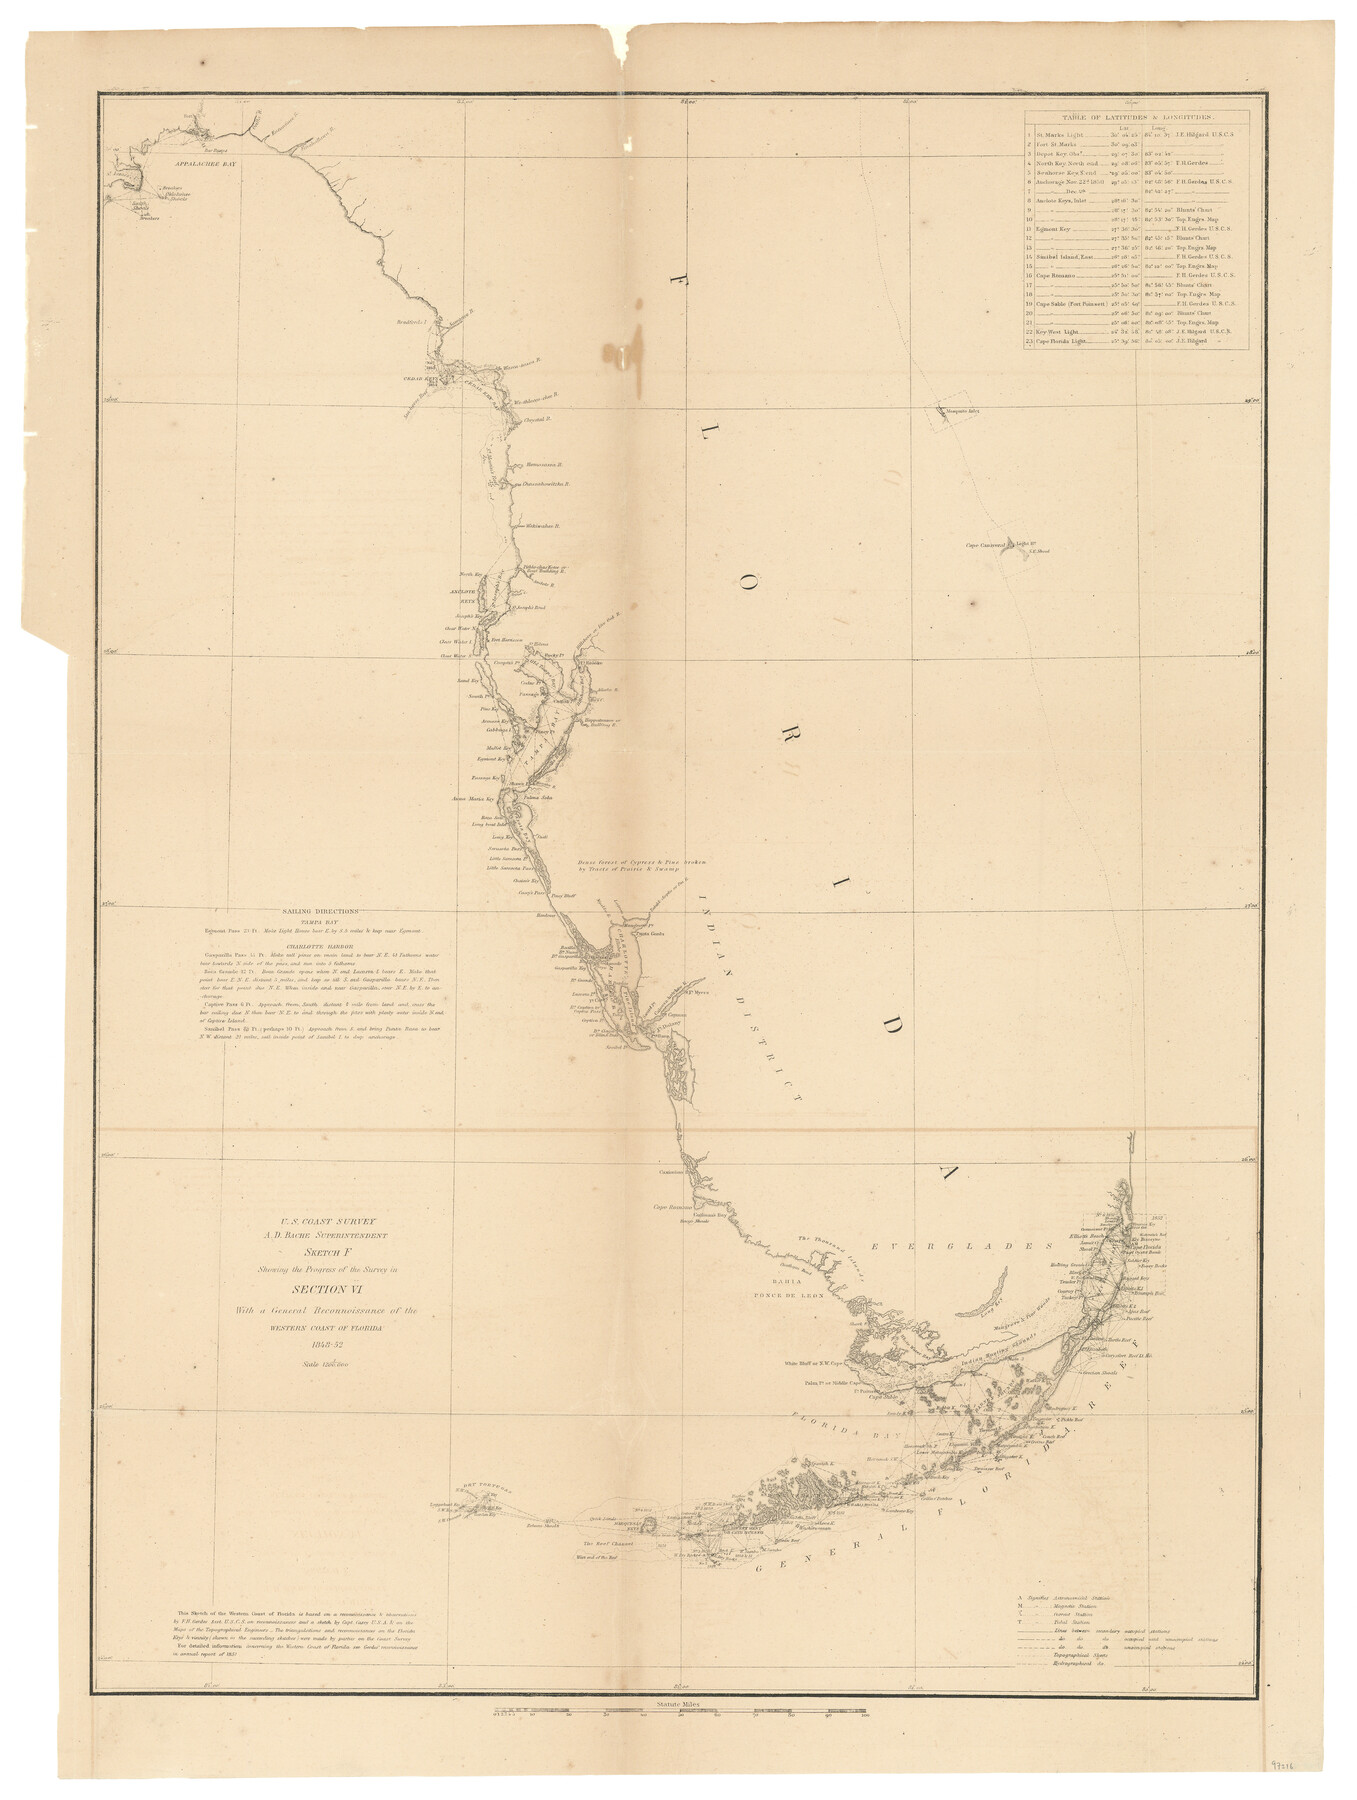 97216, Sketch F Showing the Progress of the Survey in Section VI With a General Reconnoissance of the Western Coast of Florida, General Map Collection